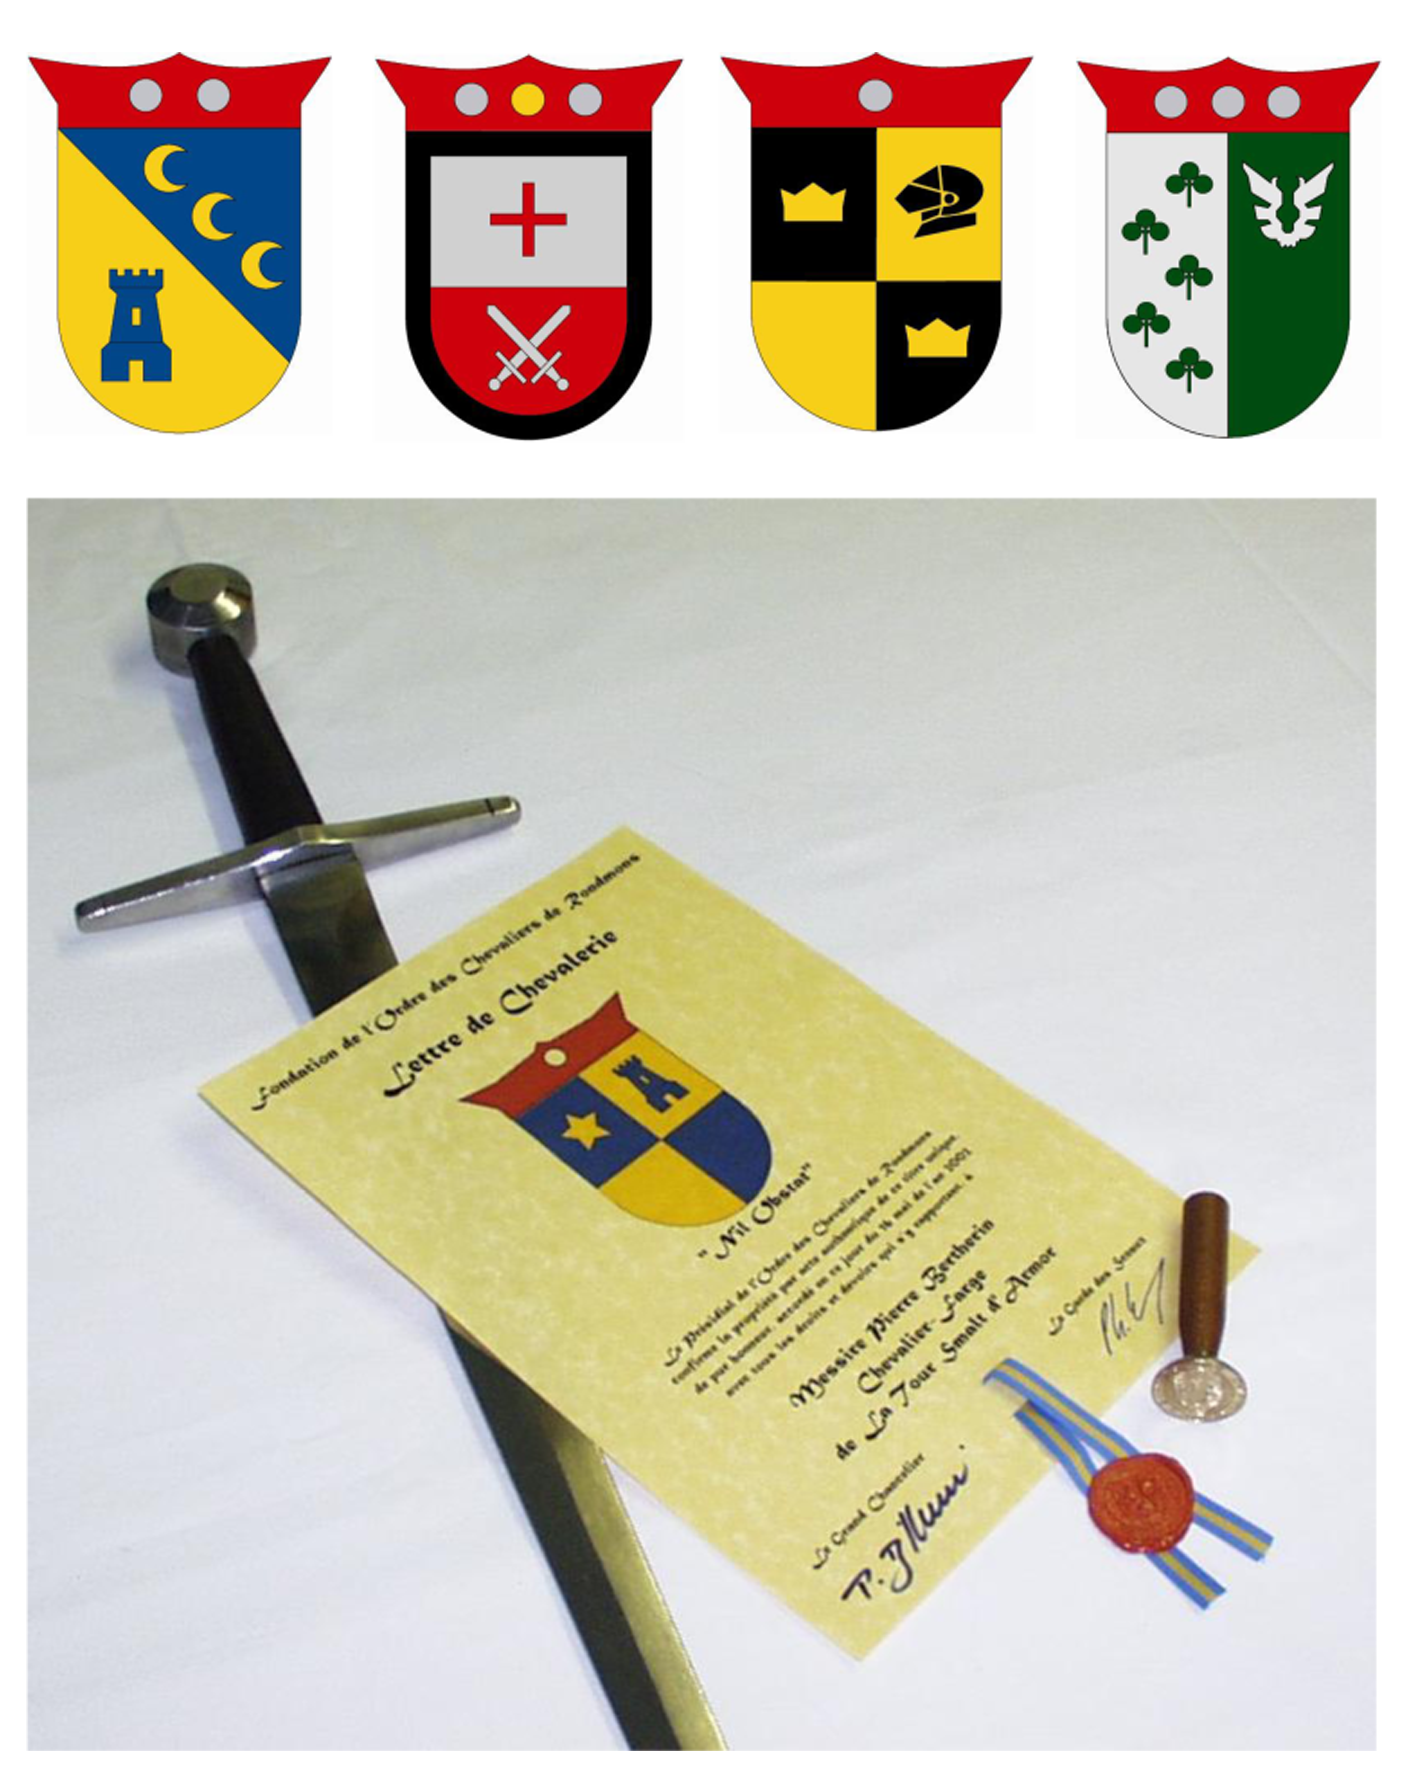 Become a knight now!